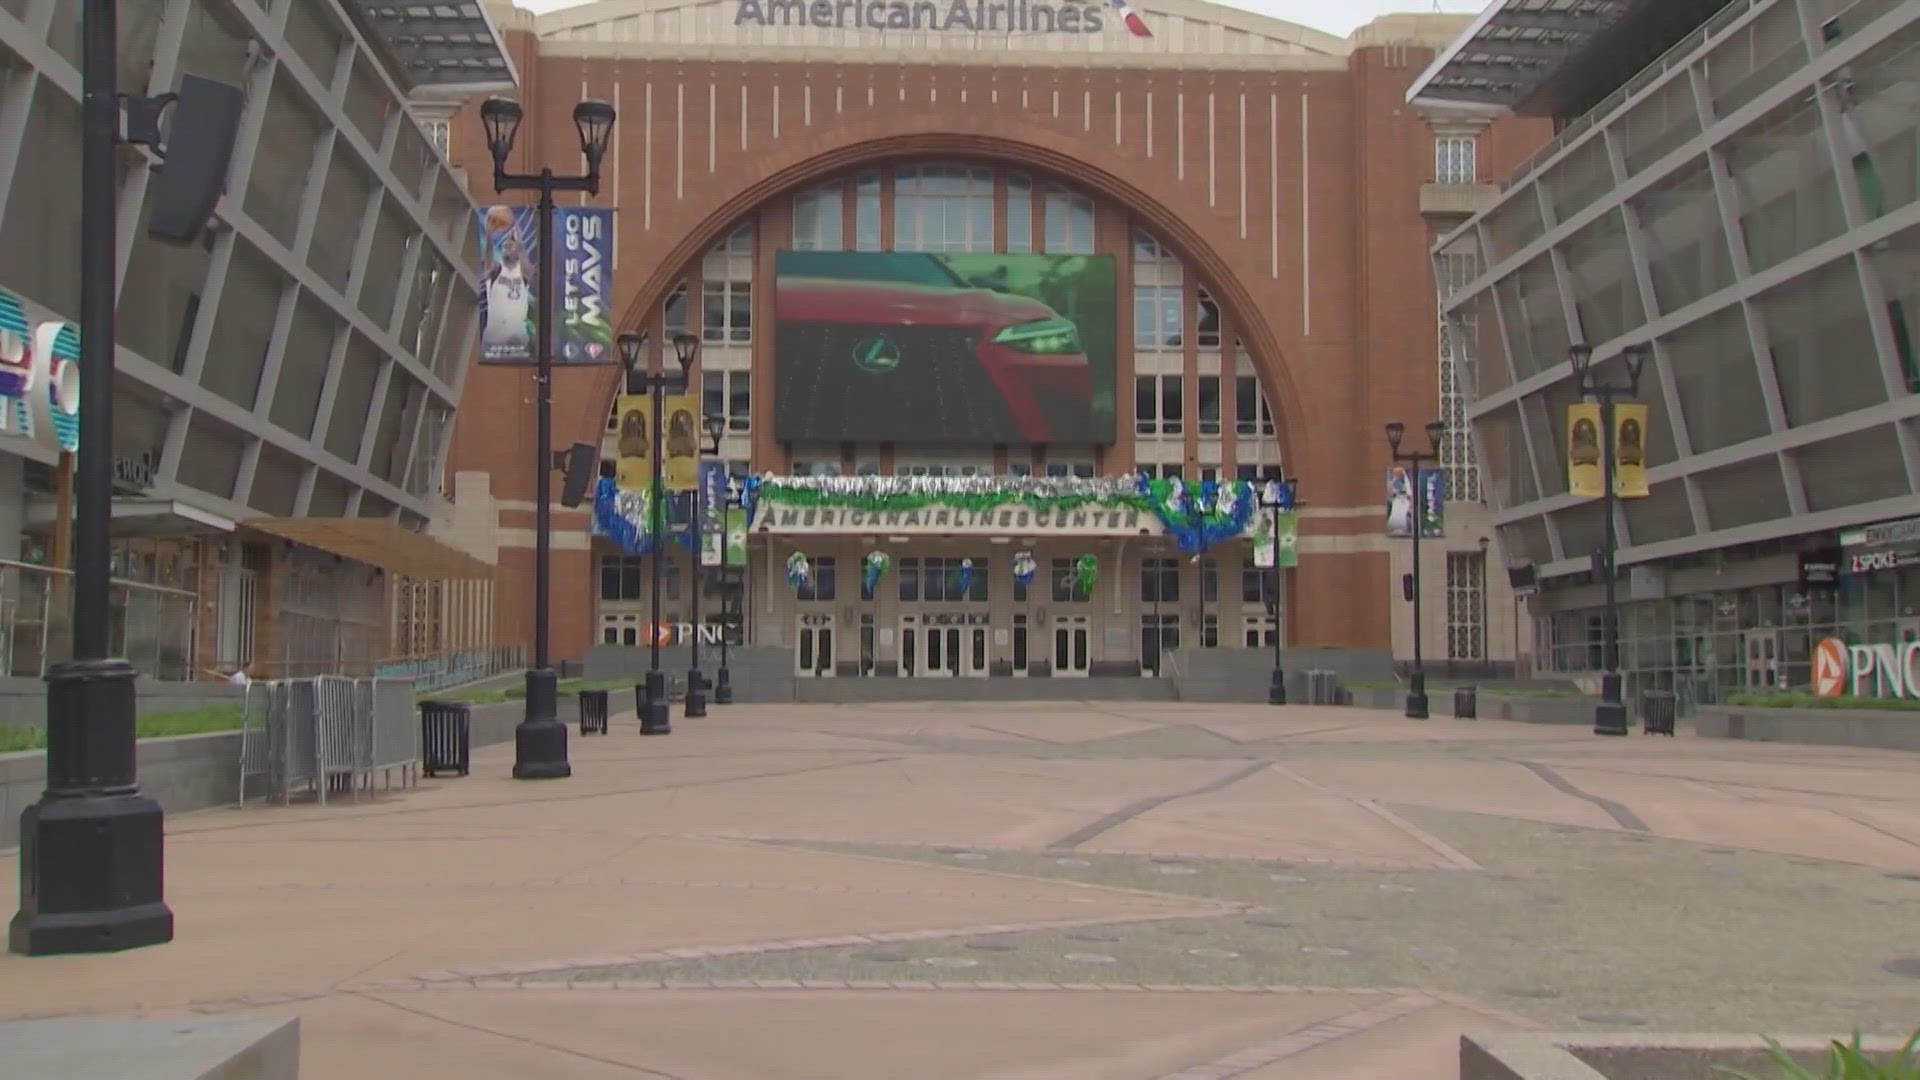 The Dallas Business Journal says a $10 million centerpiece video board will be one of the many upgrades revealed on Friday.